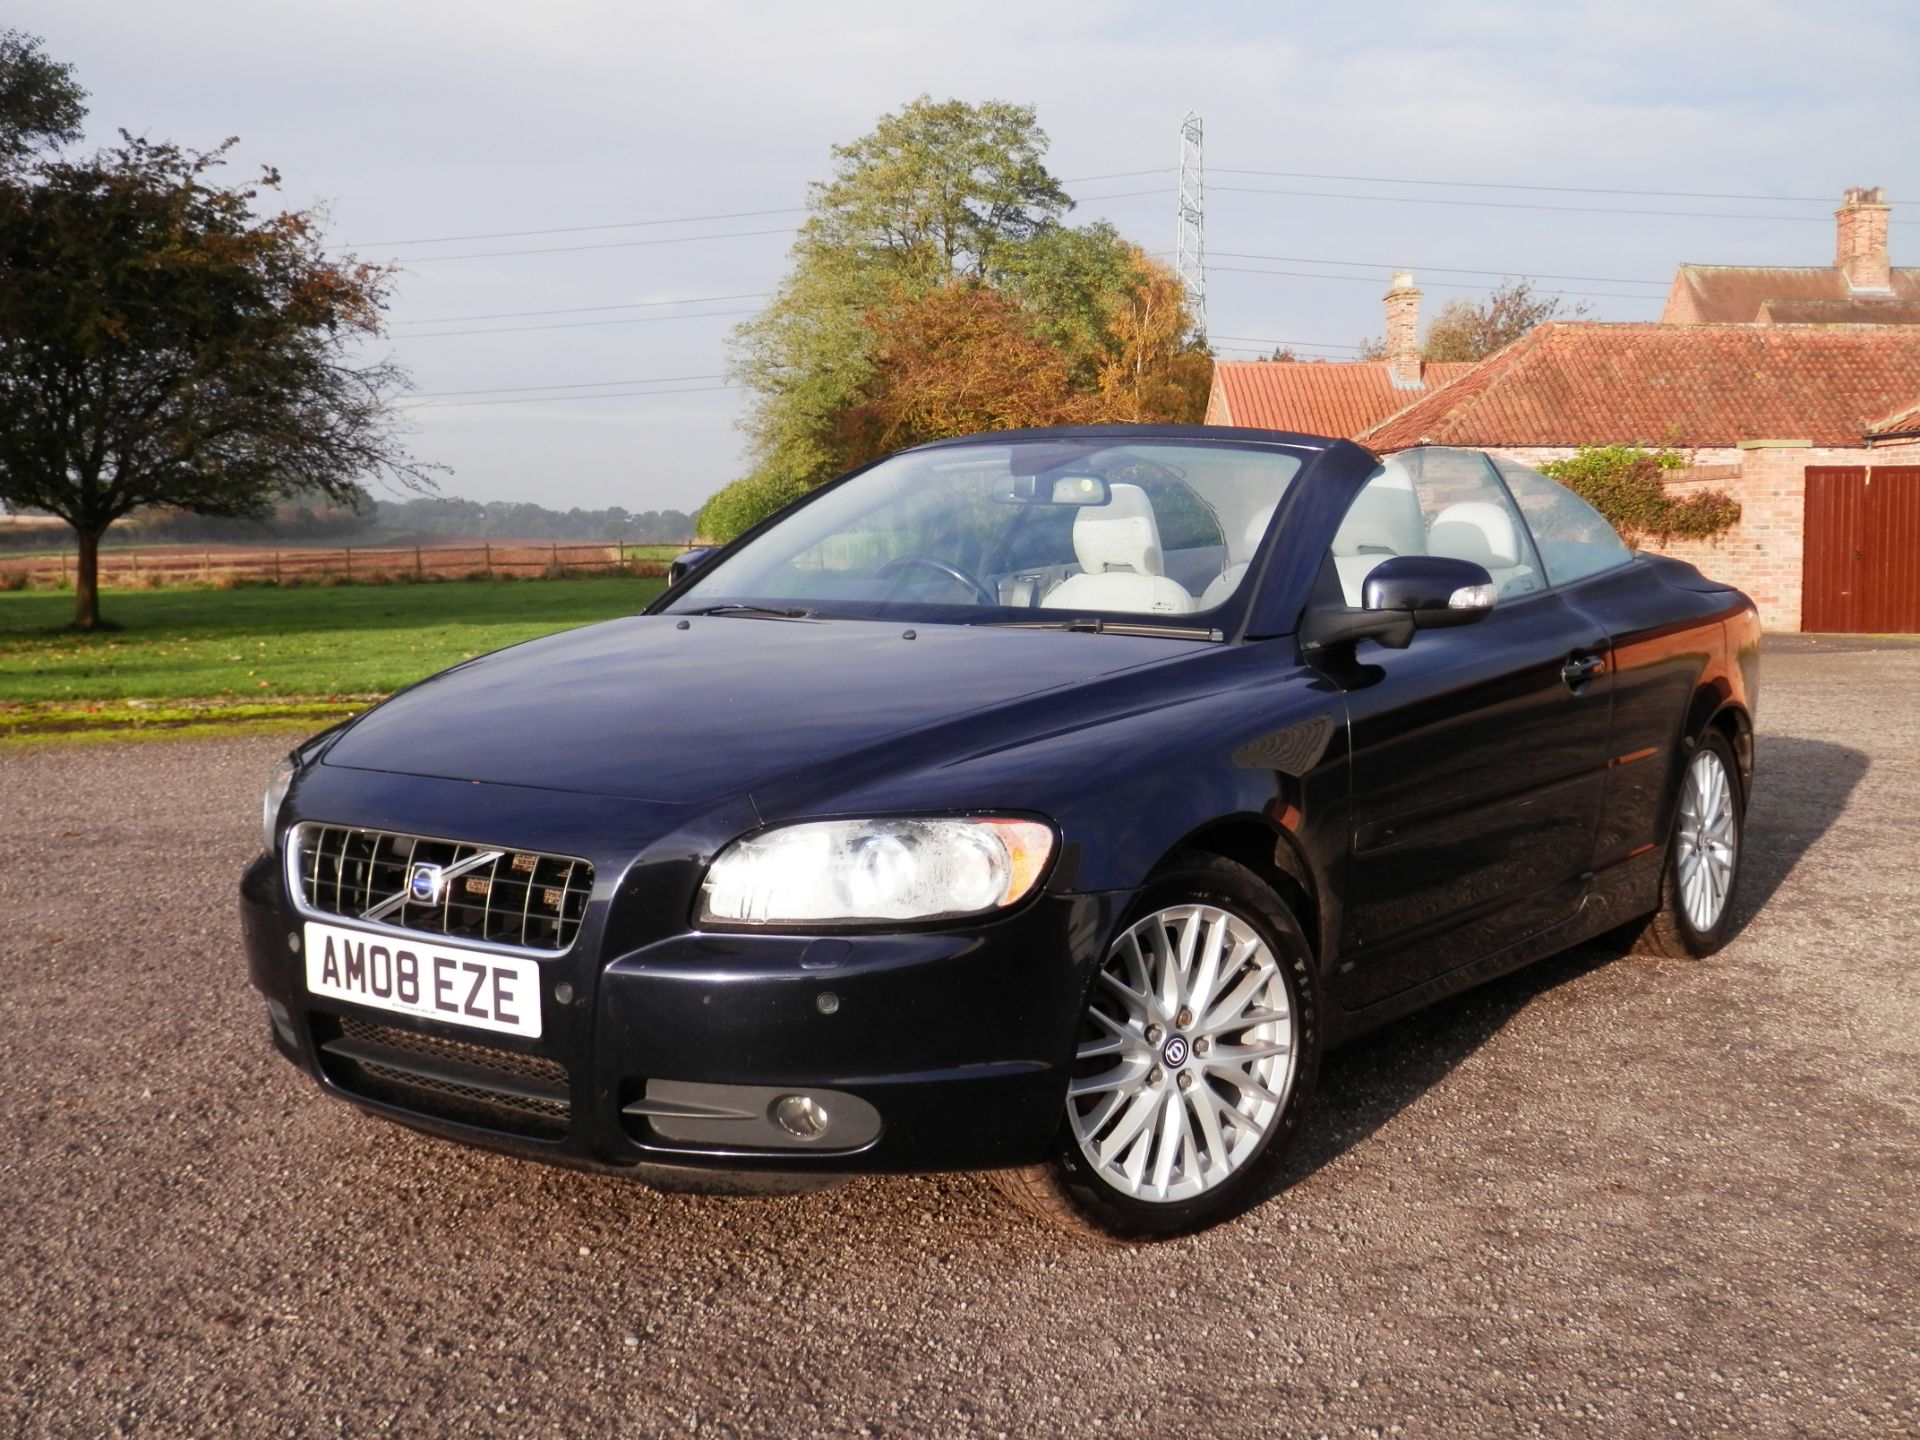 2008/08 VOLVO C70 SE LUX D5, DIESEL AUTO,CONVERTIBLE, MOT MAY 2017, ONLY 102K MILES, 180 BHP. - Image 57 of 57